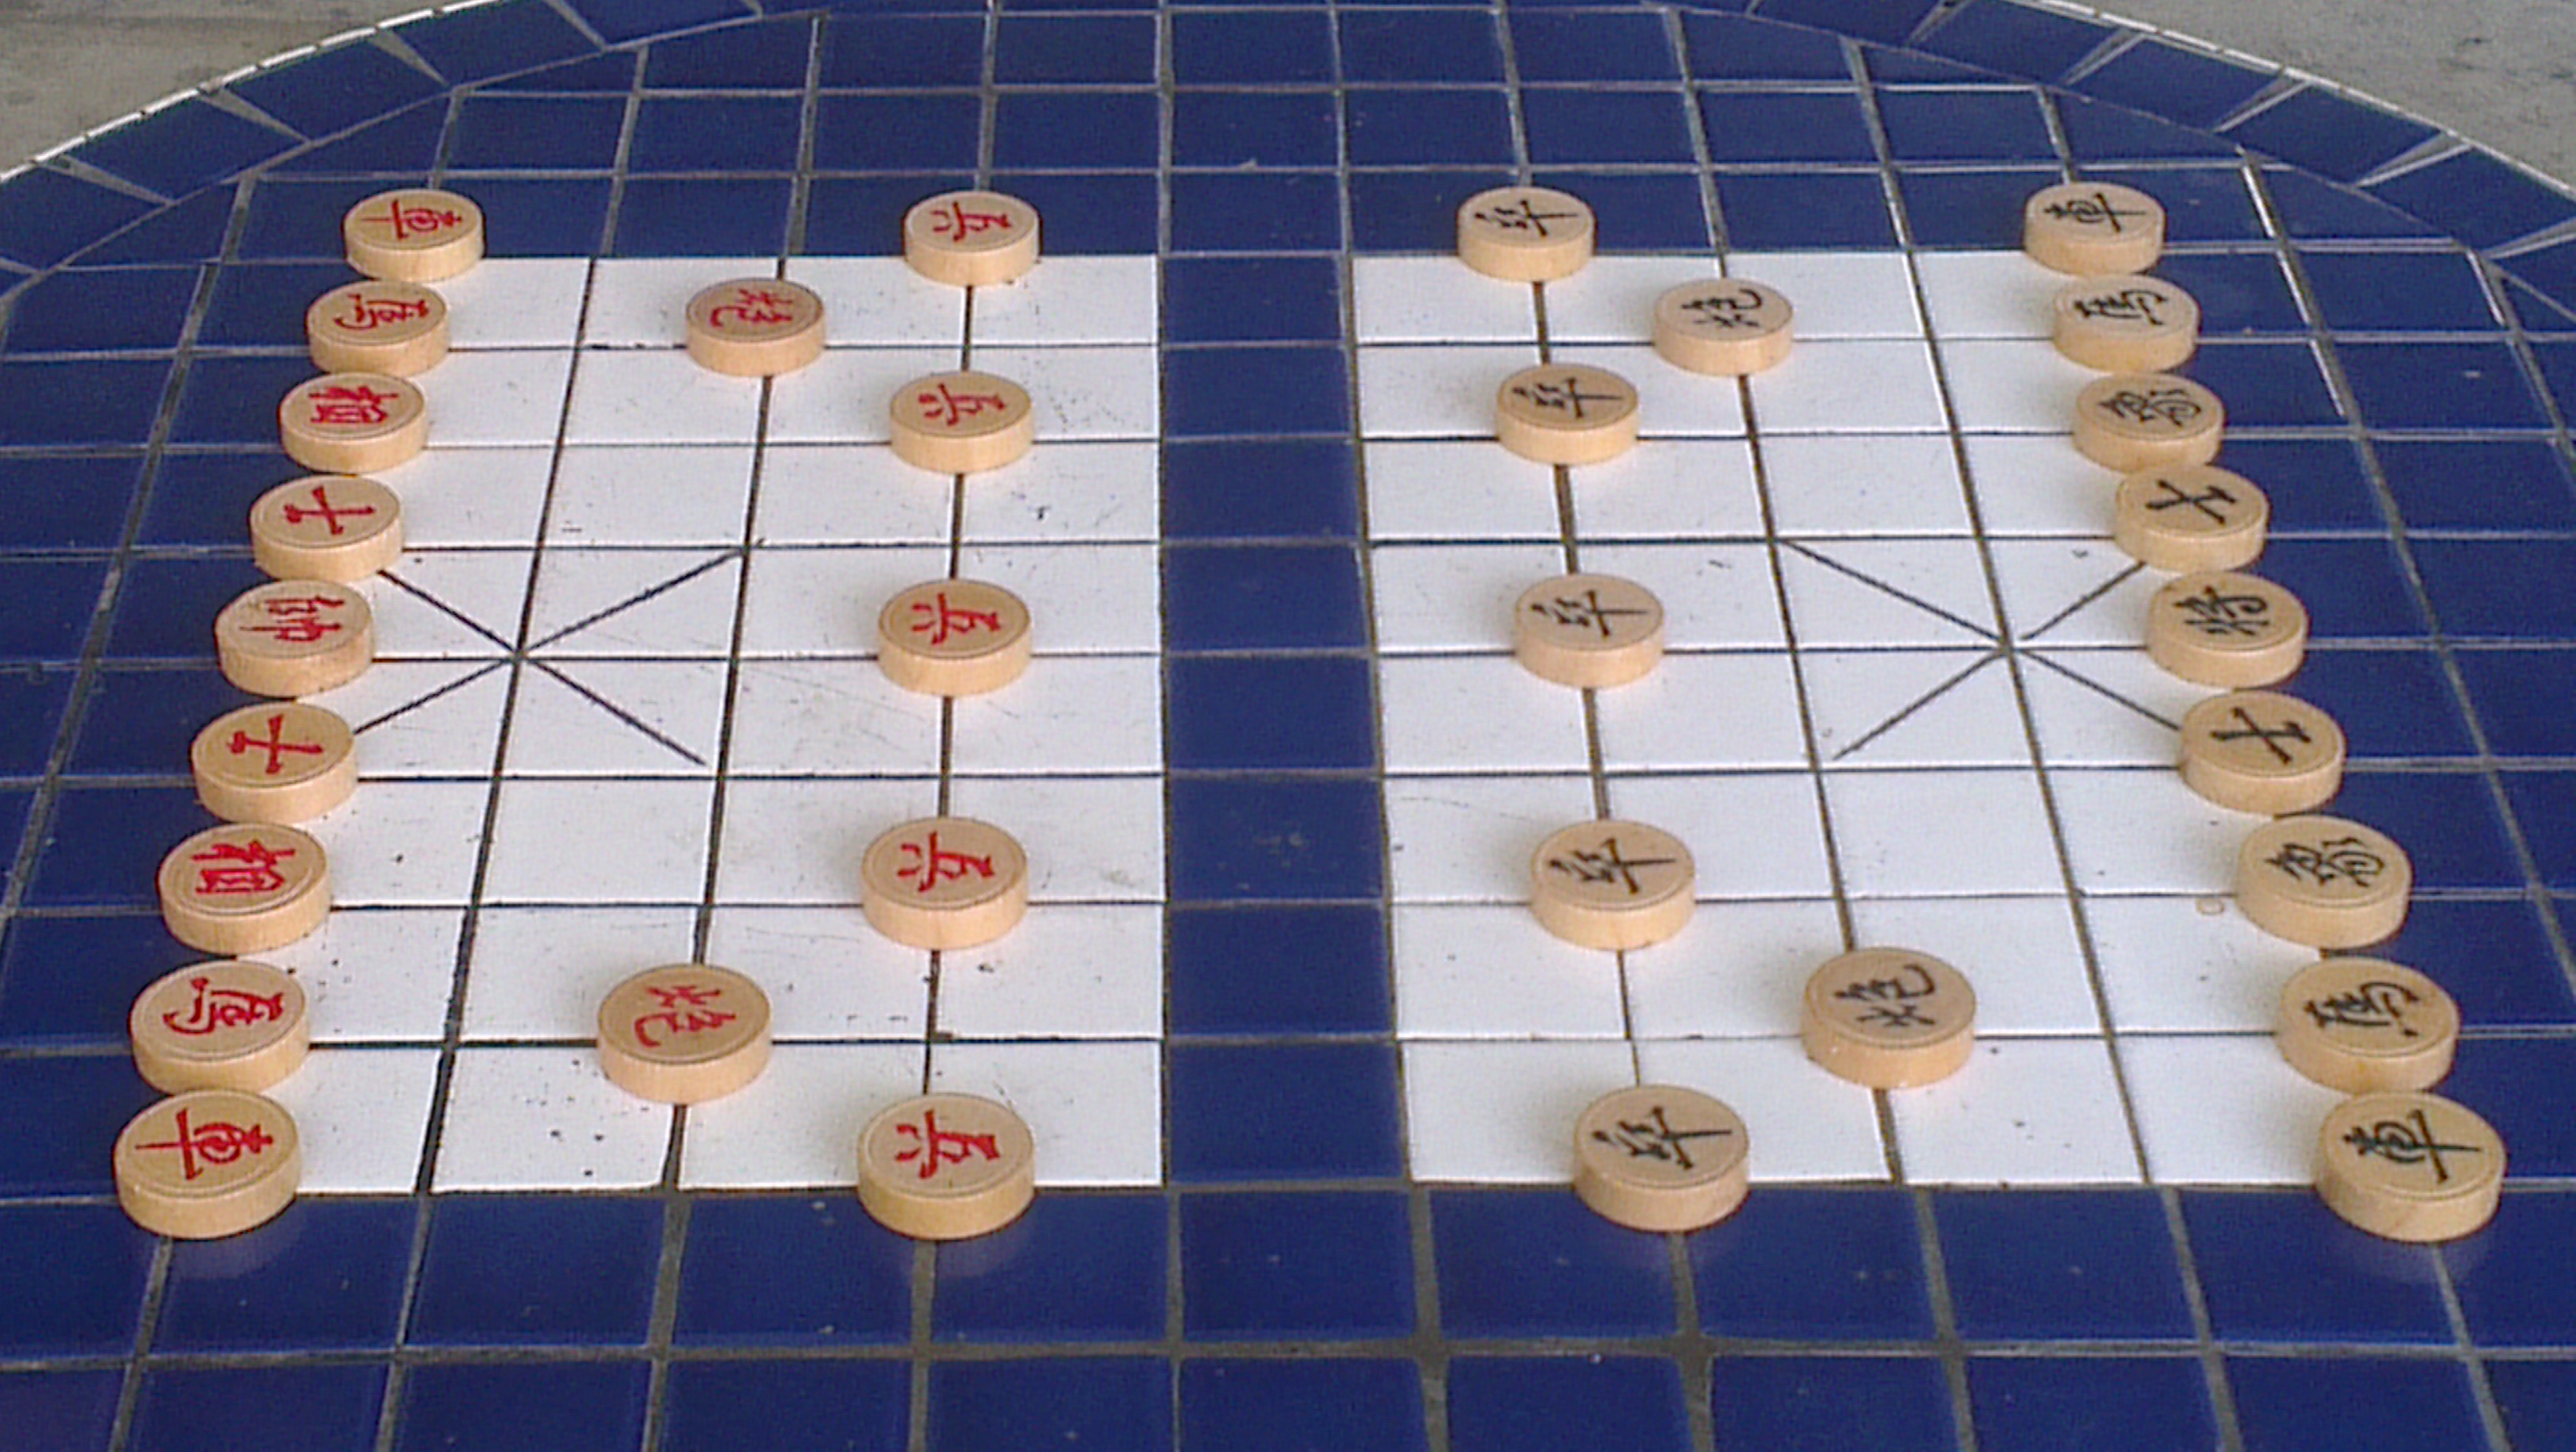 Xiangqi Board found on the void decks in housing estates in Singapore